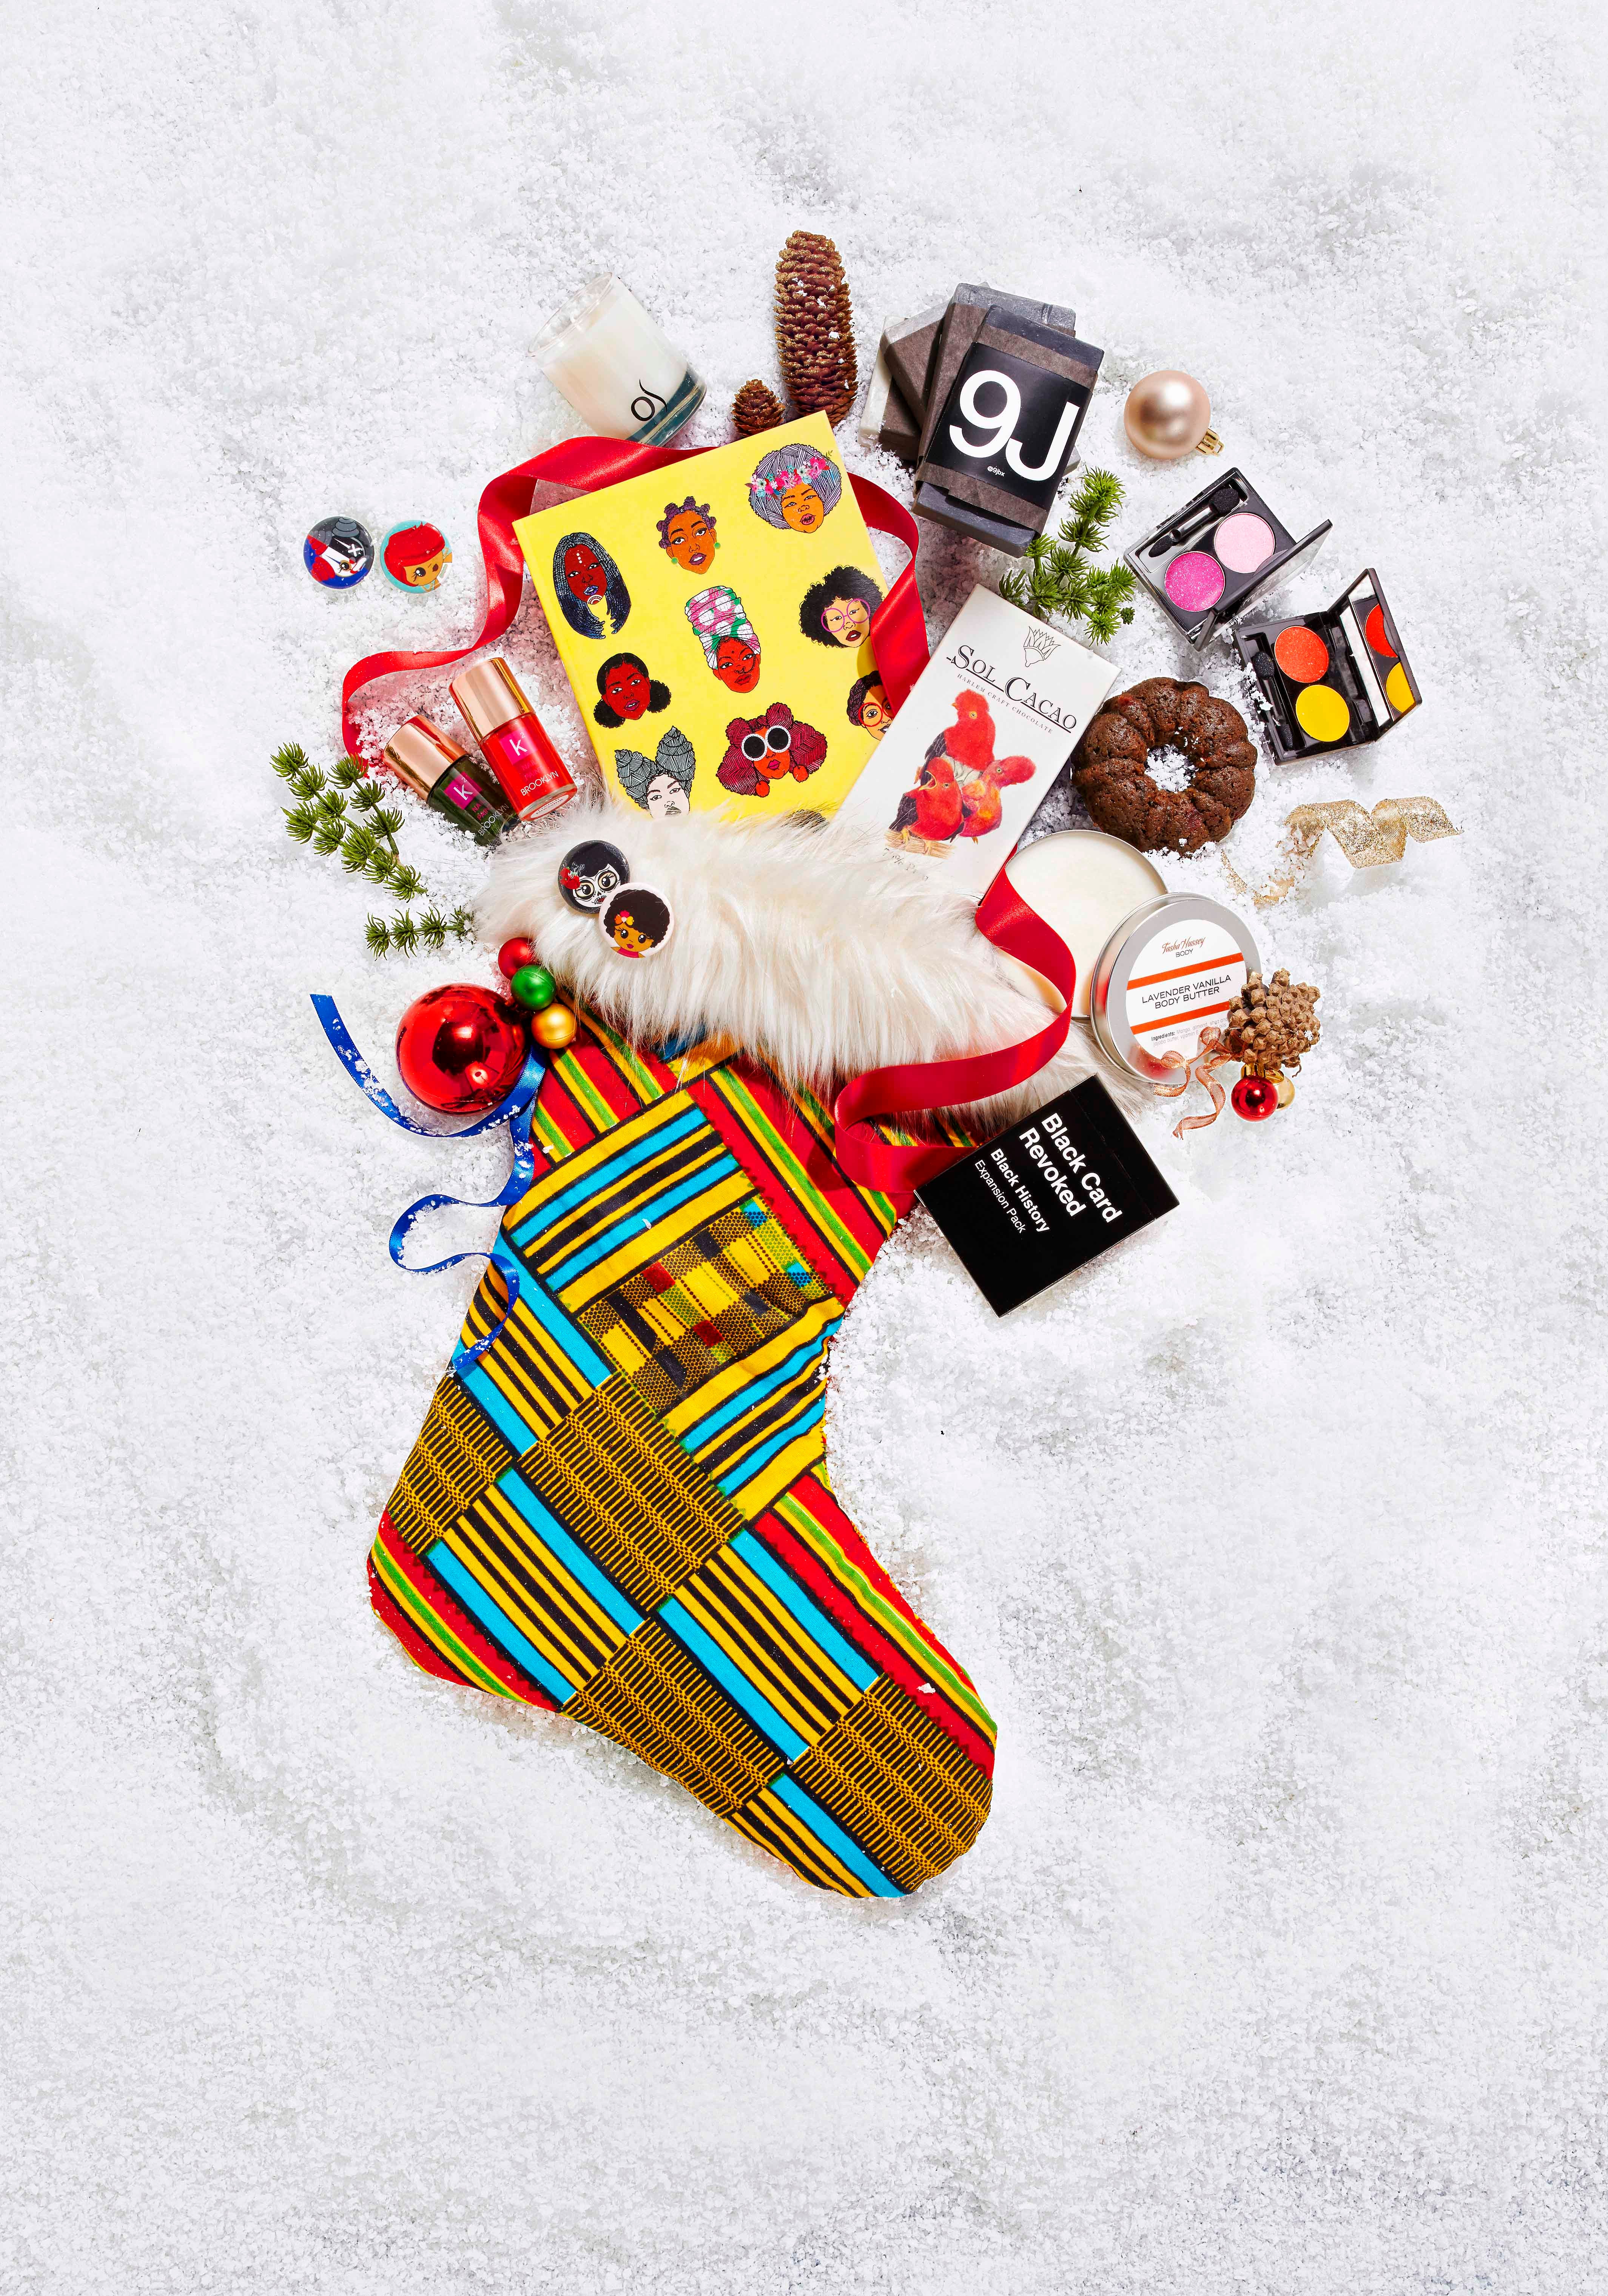 #BuyBlack Holiday 2016 Gift Guide: Stocking Stuffers Your Family Will Love
